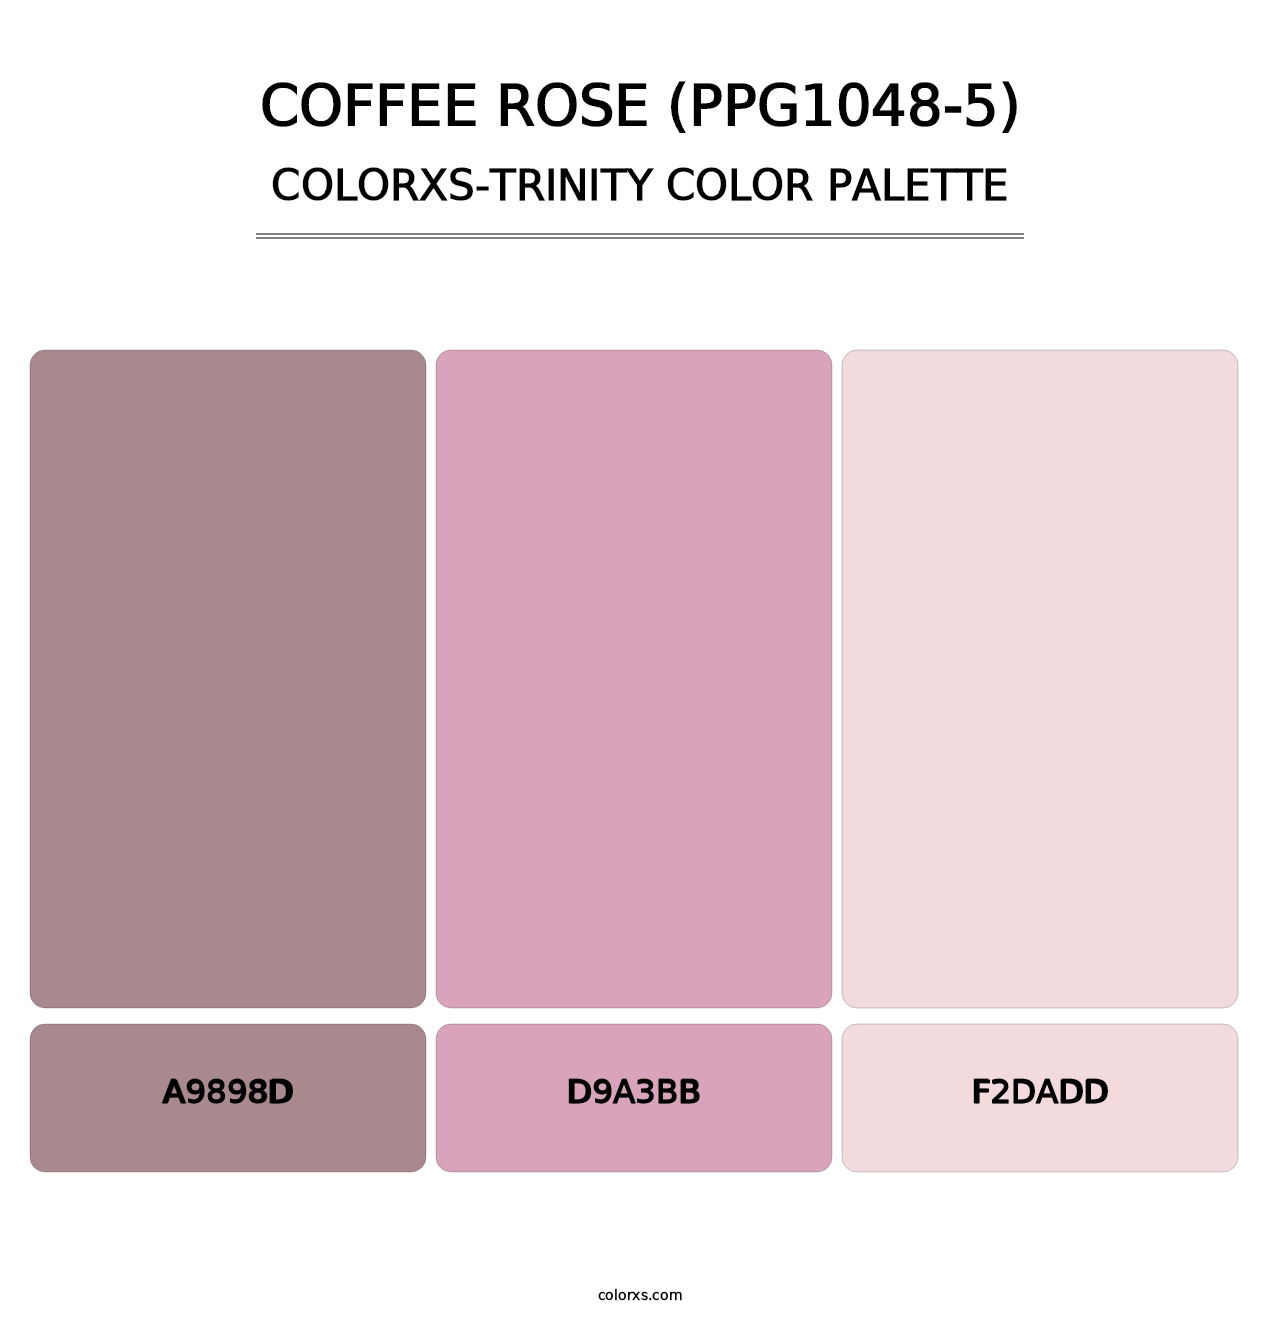 Coffee Rose (PPG1048-5) - Colorxs Trinity Palette